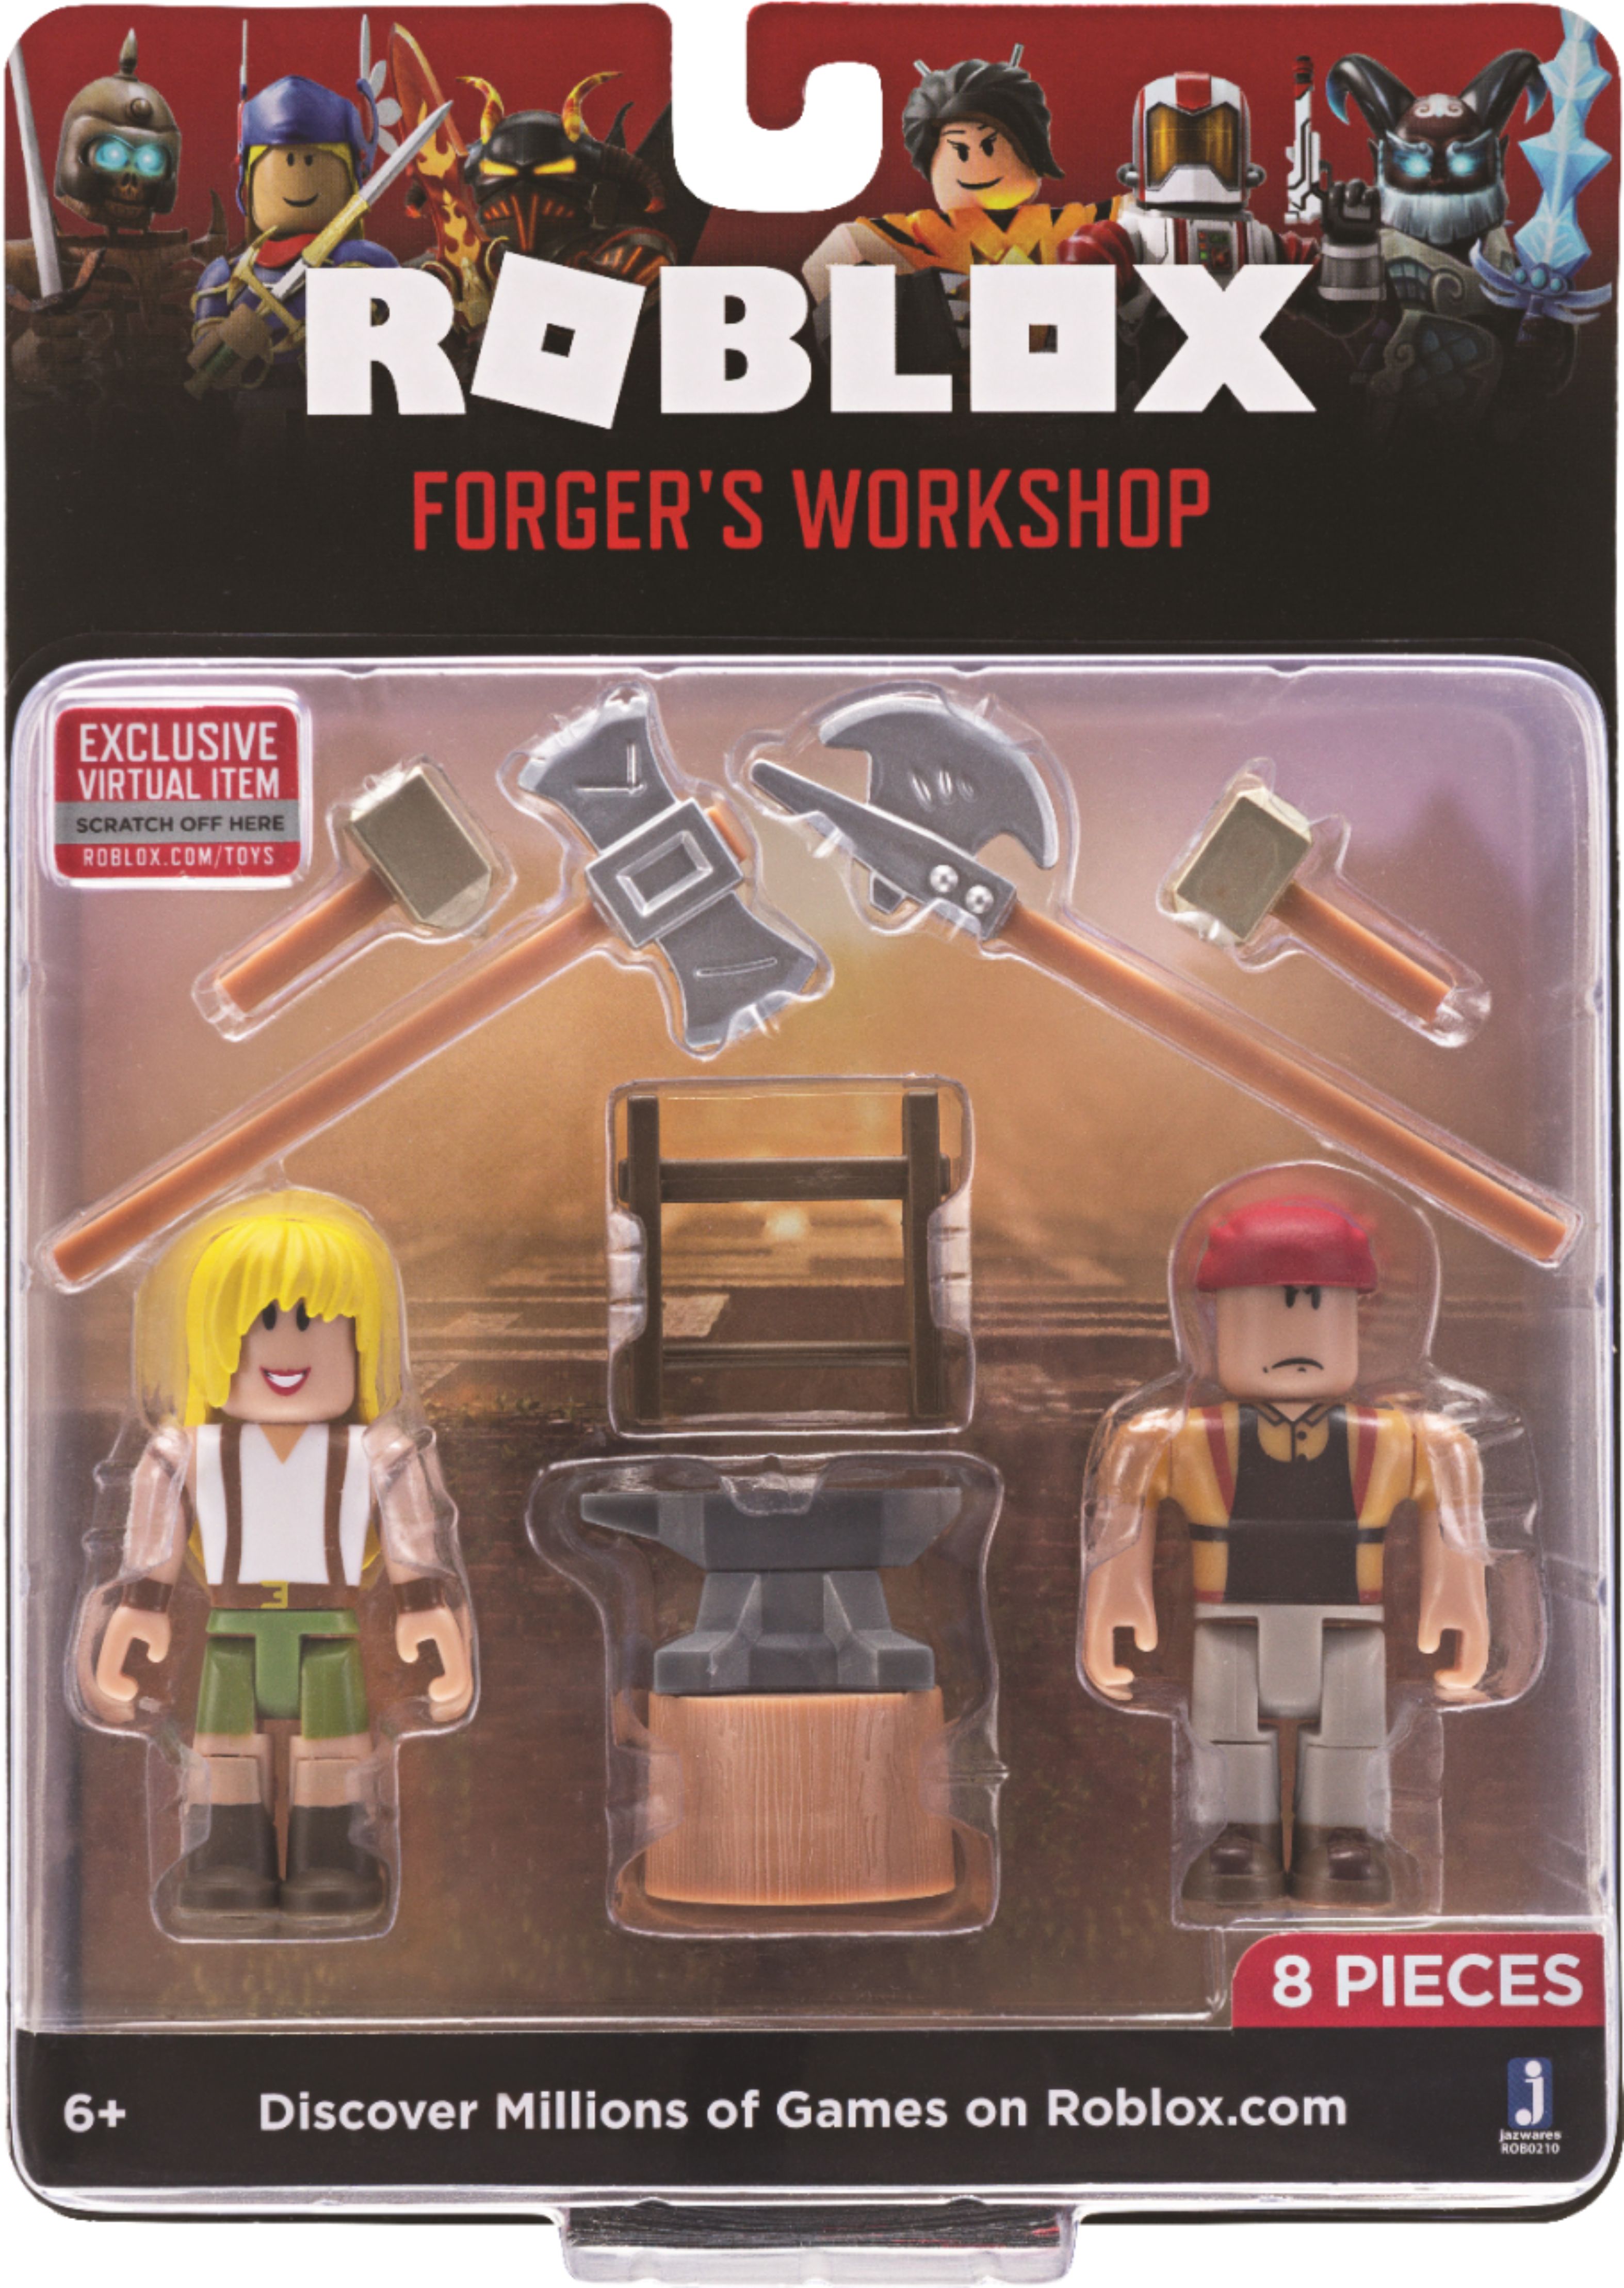 Roblox Game Pack Styles May Vary Rob0313 Best Buy